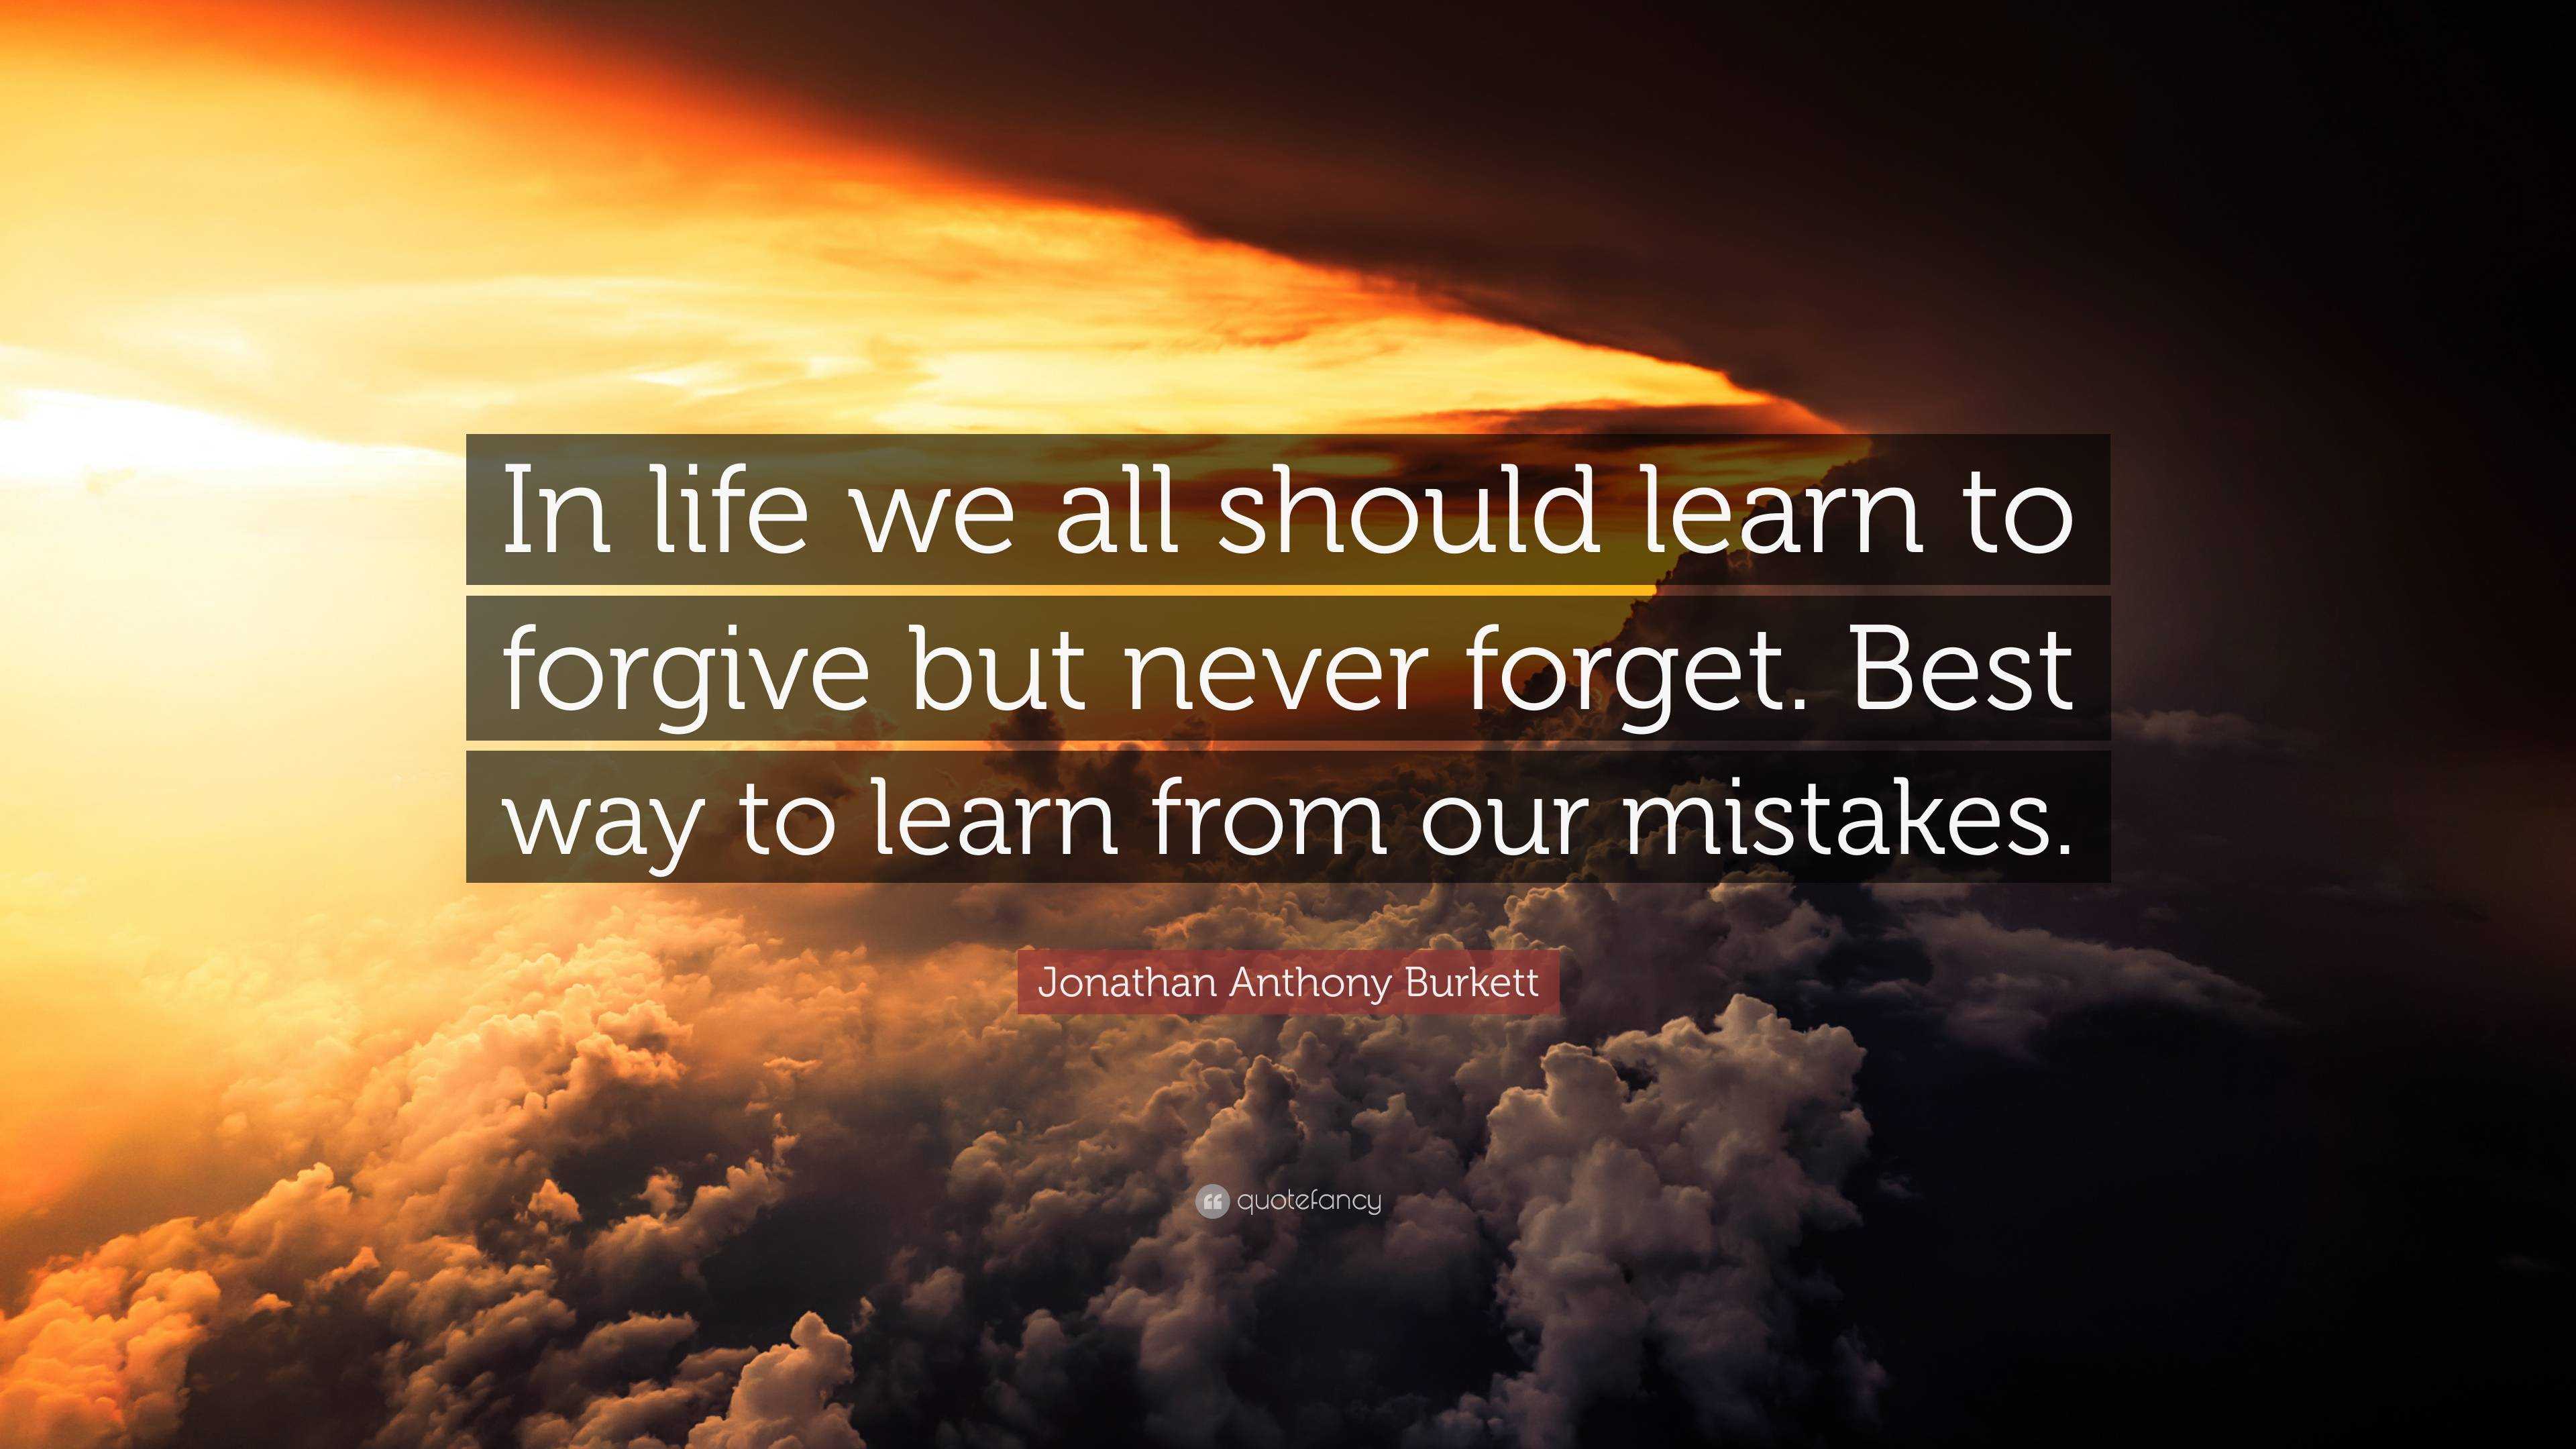 Jonathan Anthony Burkett Quote In Life We All Should Learn To Forgive But Never Forget Best